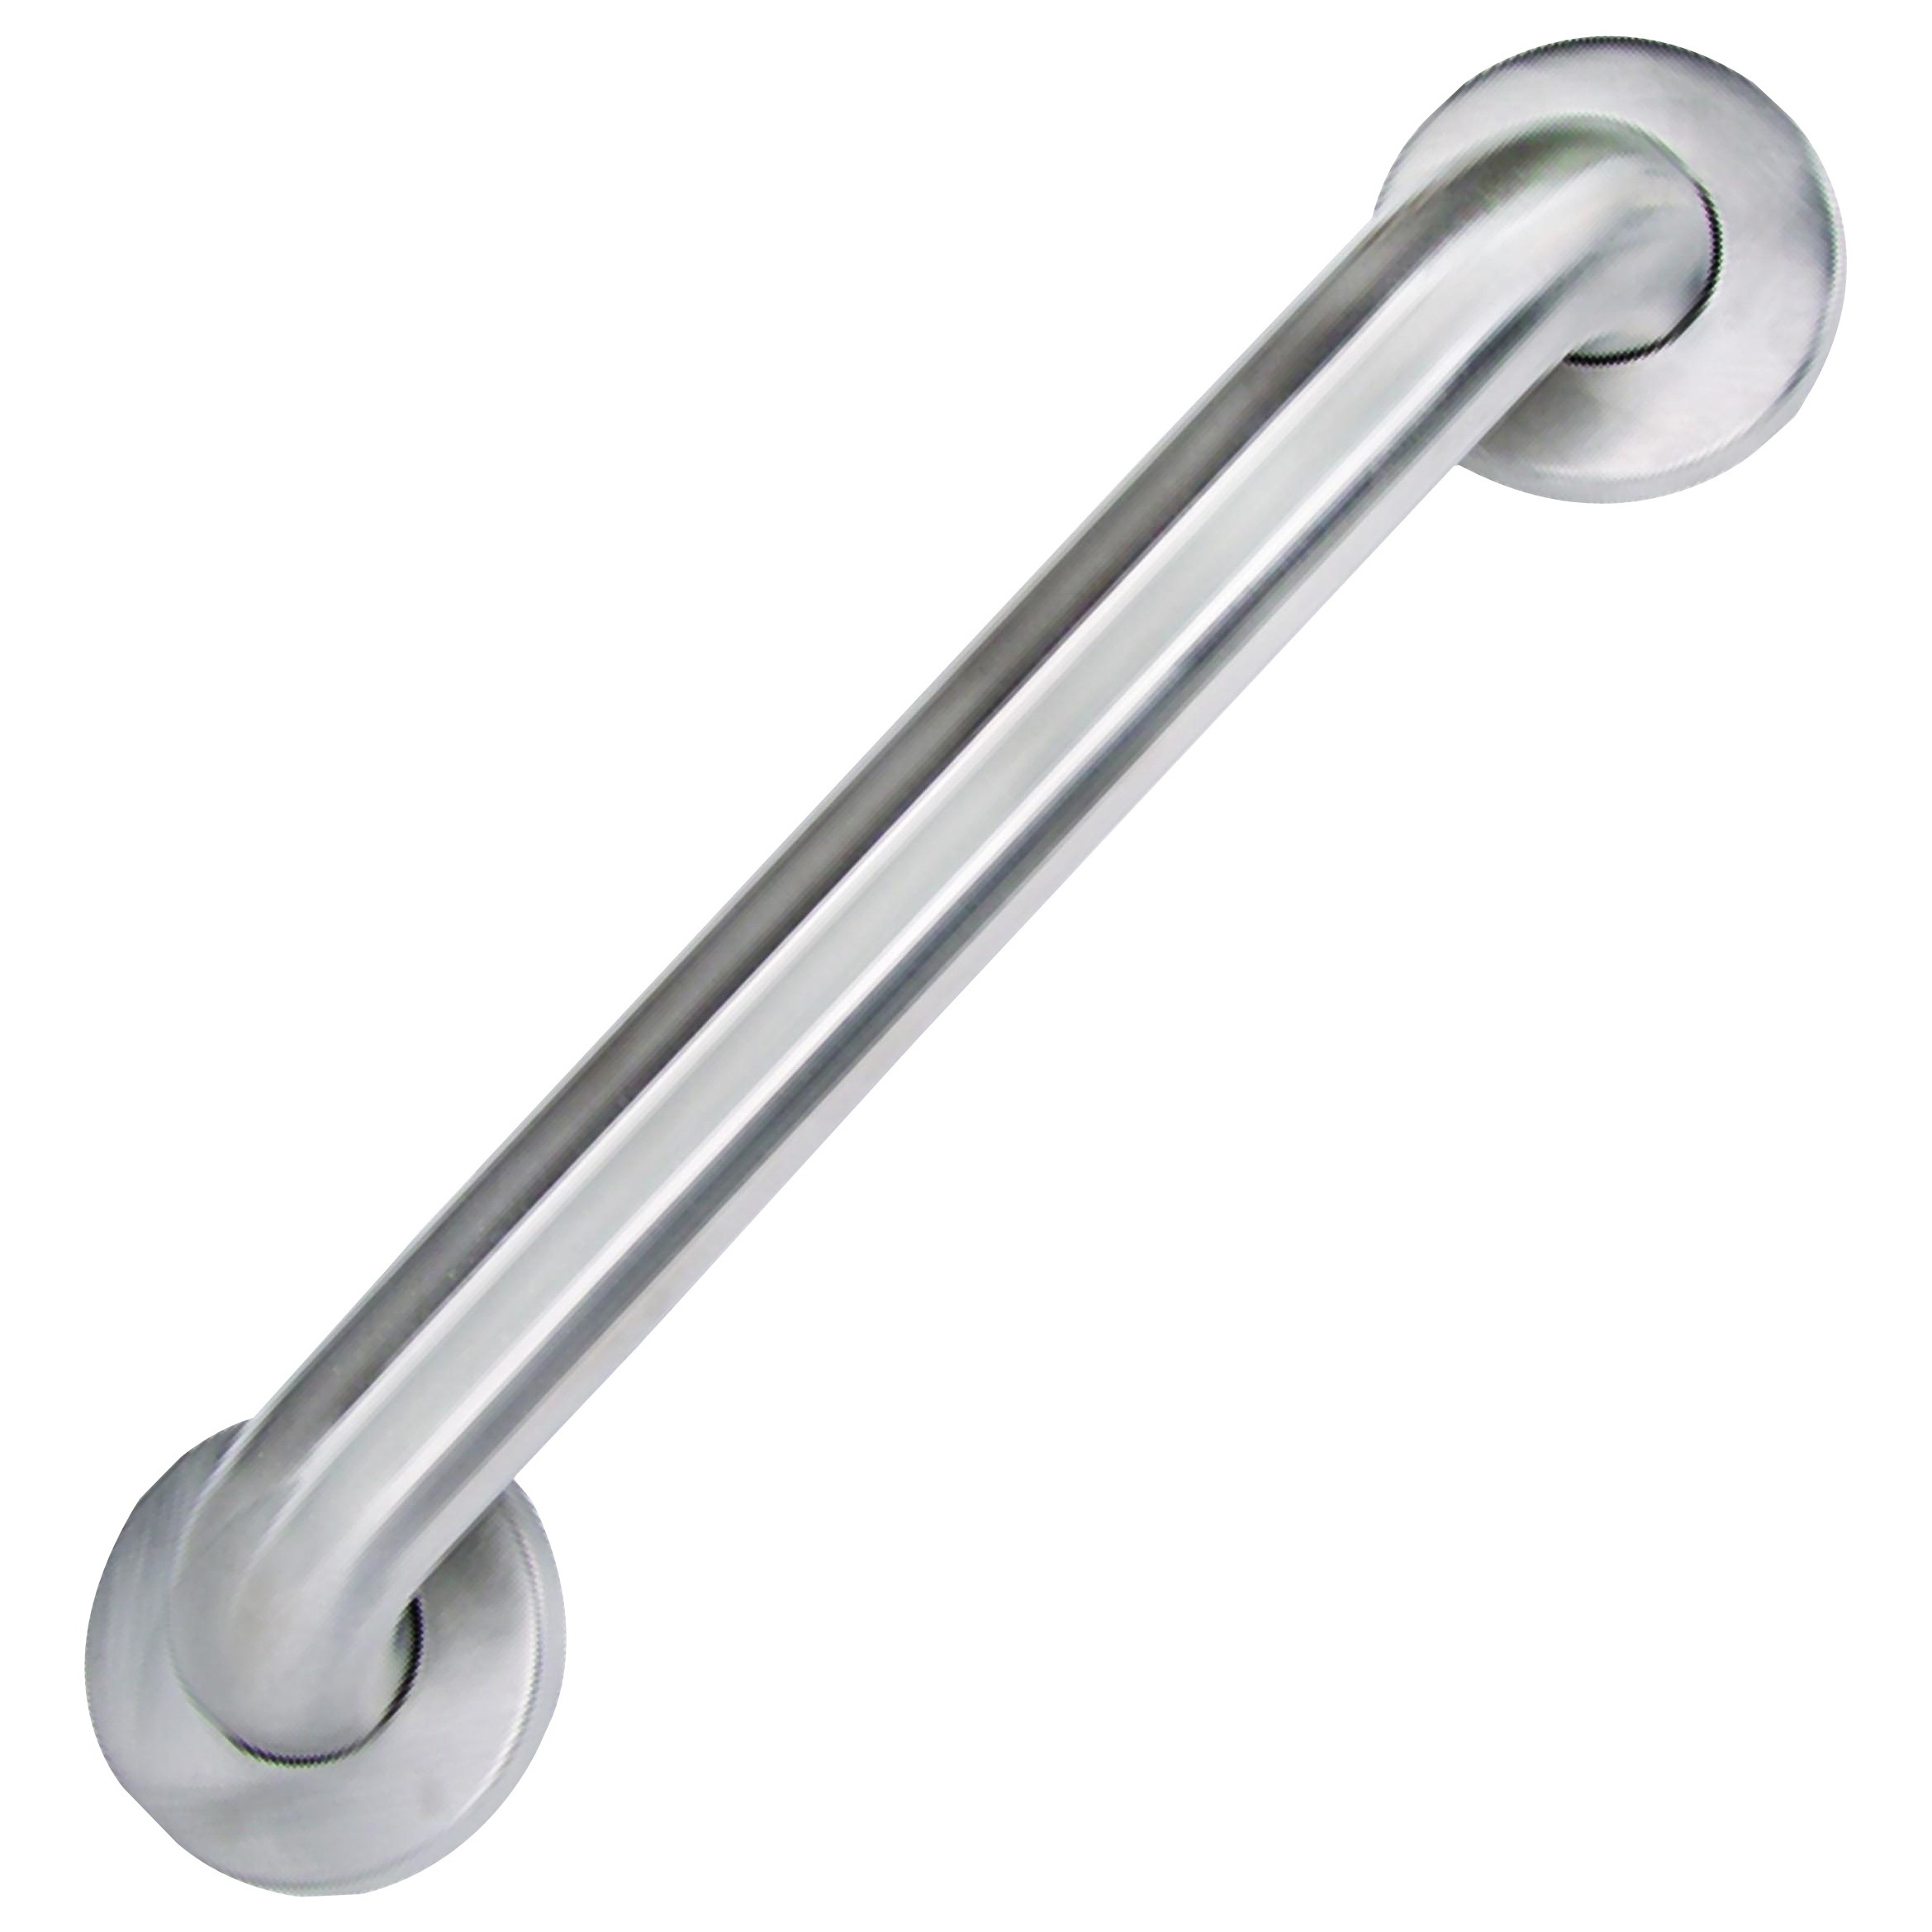 Boston Harbor SG01-01&0112 Grab Bar, 12 in L Bar, Stainless Steel, Wall Mounted Mounting